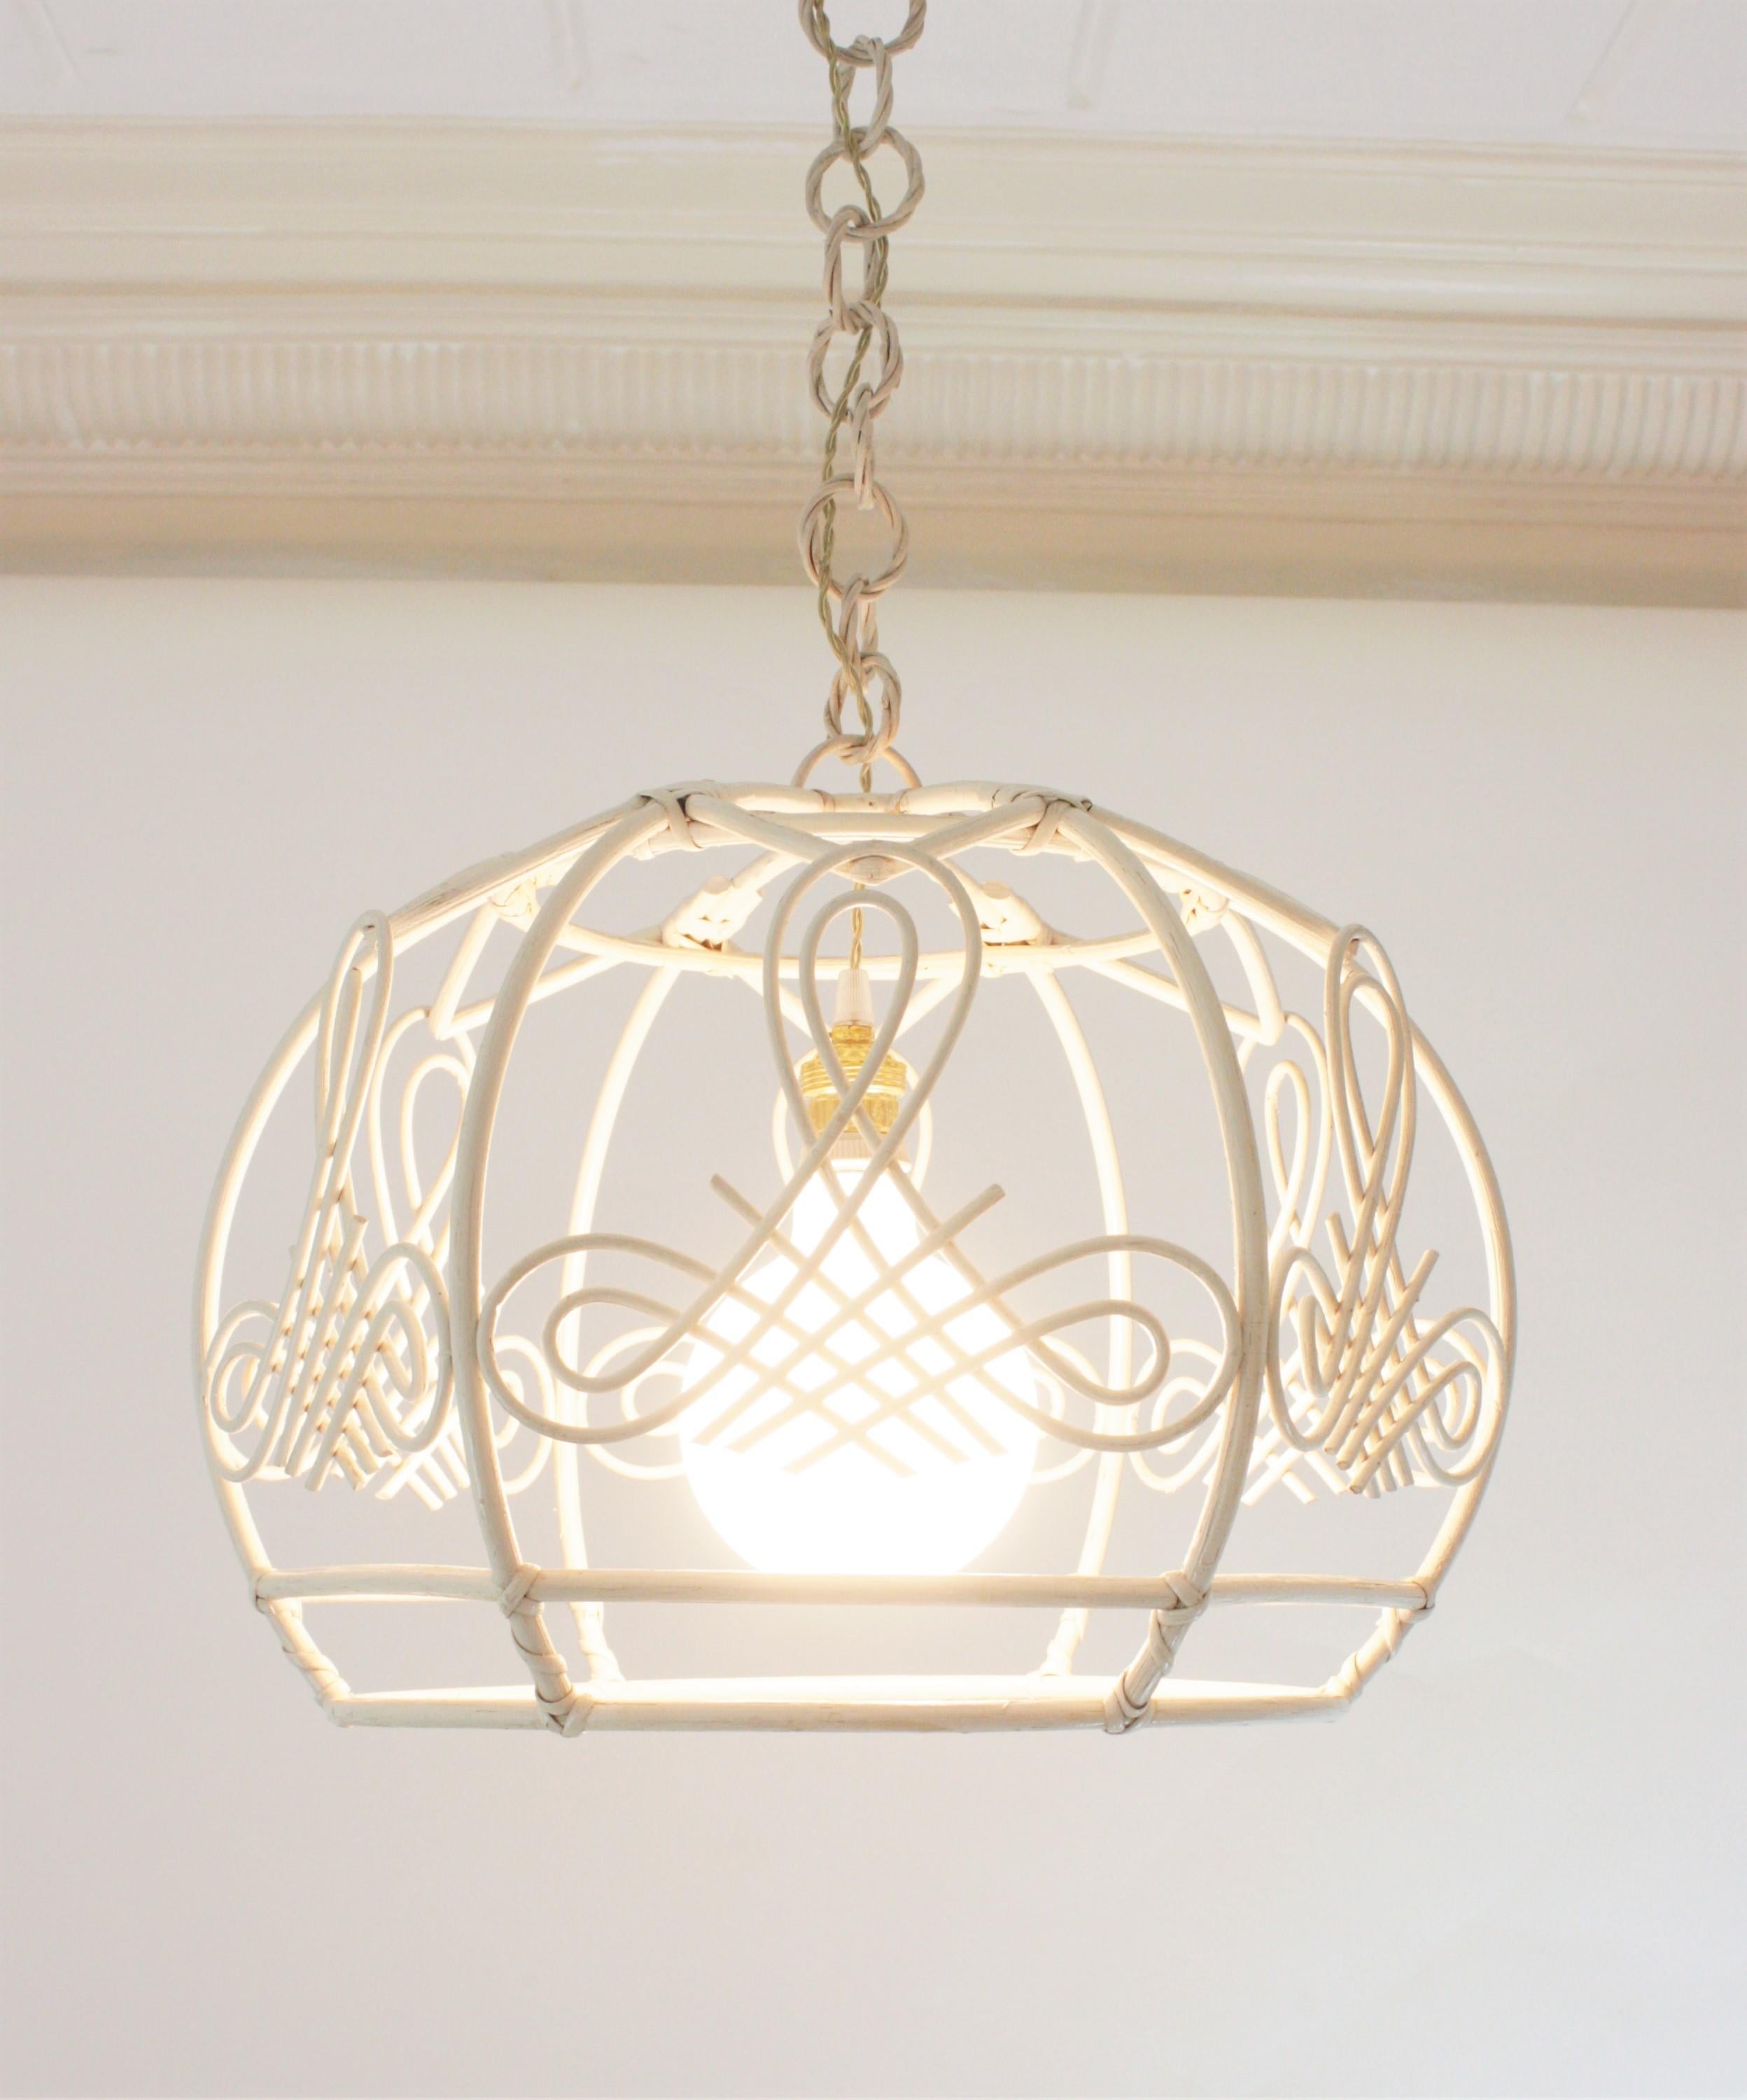 French Rattan Bell Pendant Lamp / Lantern in White Patina, 1960s For Sale 3